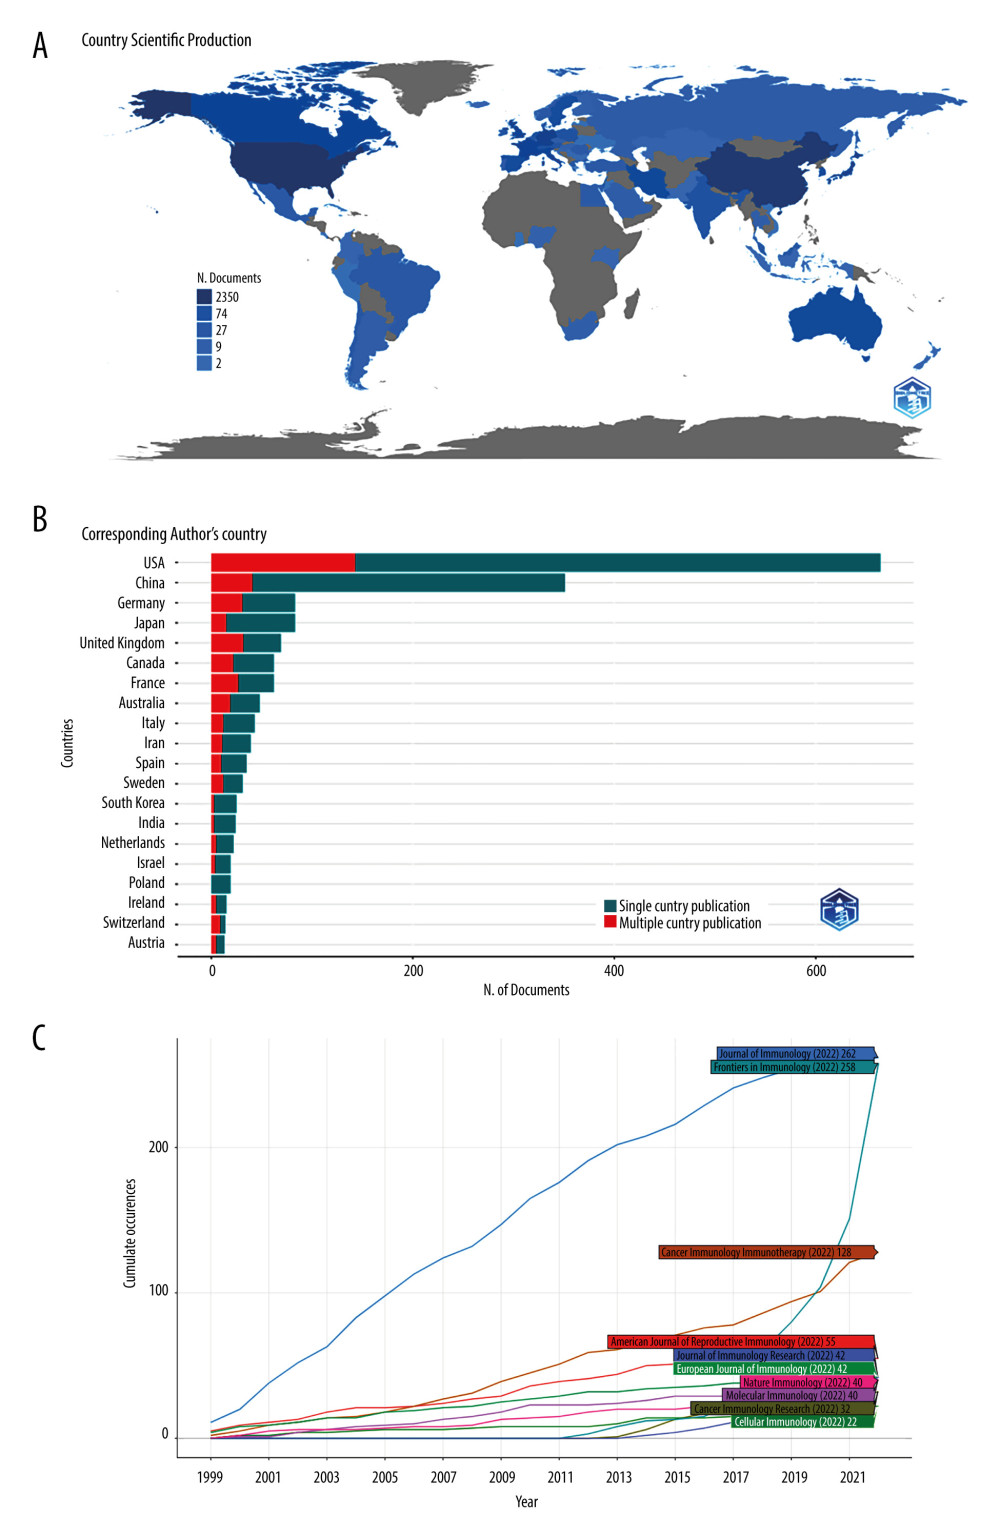 Top countries and relevant institutions that contributed to research on cell cycle in cancer immunology using R(4.2.2) package “bibliometrix”(A) International country map of publications; color depth stands for publication number. (B) Bar plot showing the 20 most prolific countries regarding cancer cell cycle for immunology in line with countries of corresponding authors. (C) Ten most prolific countries over time. MCP refers to multiple-country publications, while SCP indicates single-country publications.